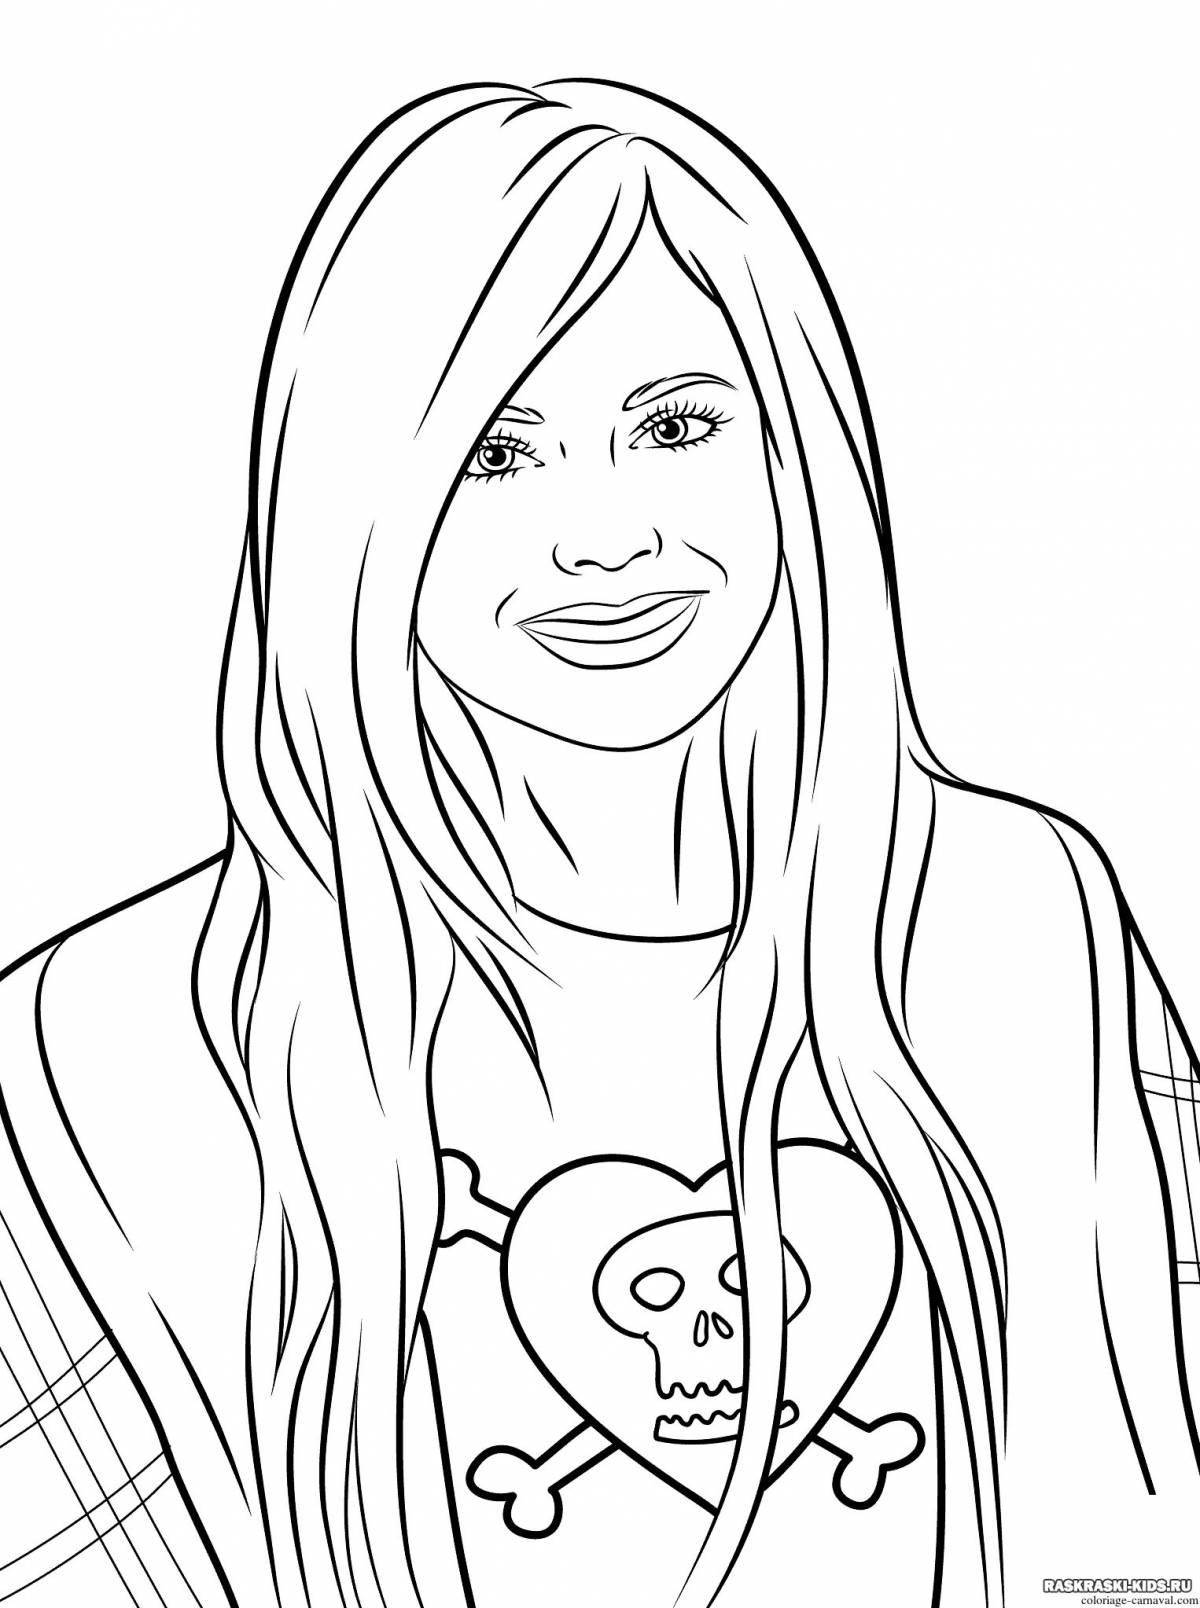 Colorful celebrity coloring pages